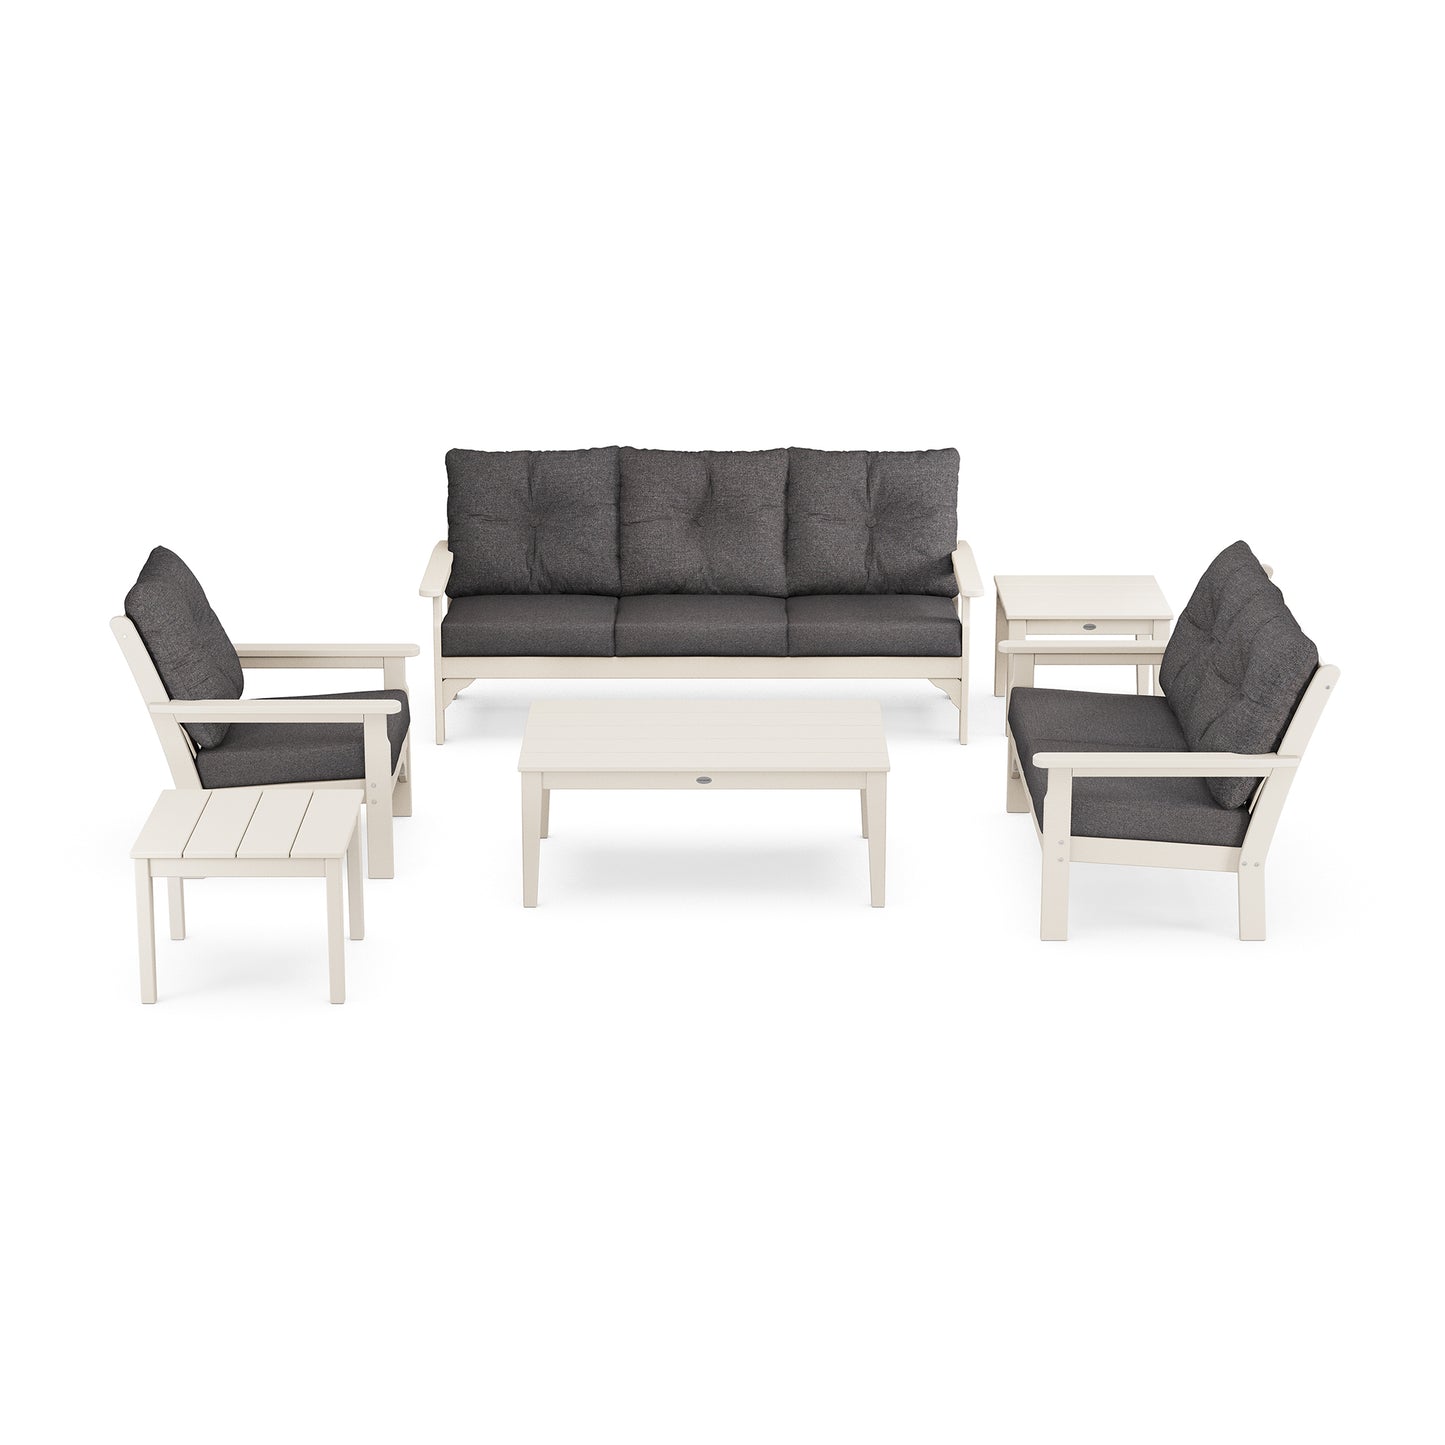 Modern outdoor luxury furniture set including a POLYWOOD Vineyard 6-Piece Deep Seating Set, all in white with gray cushions, displayed against a white background.